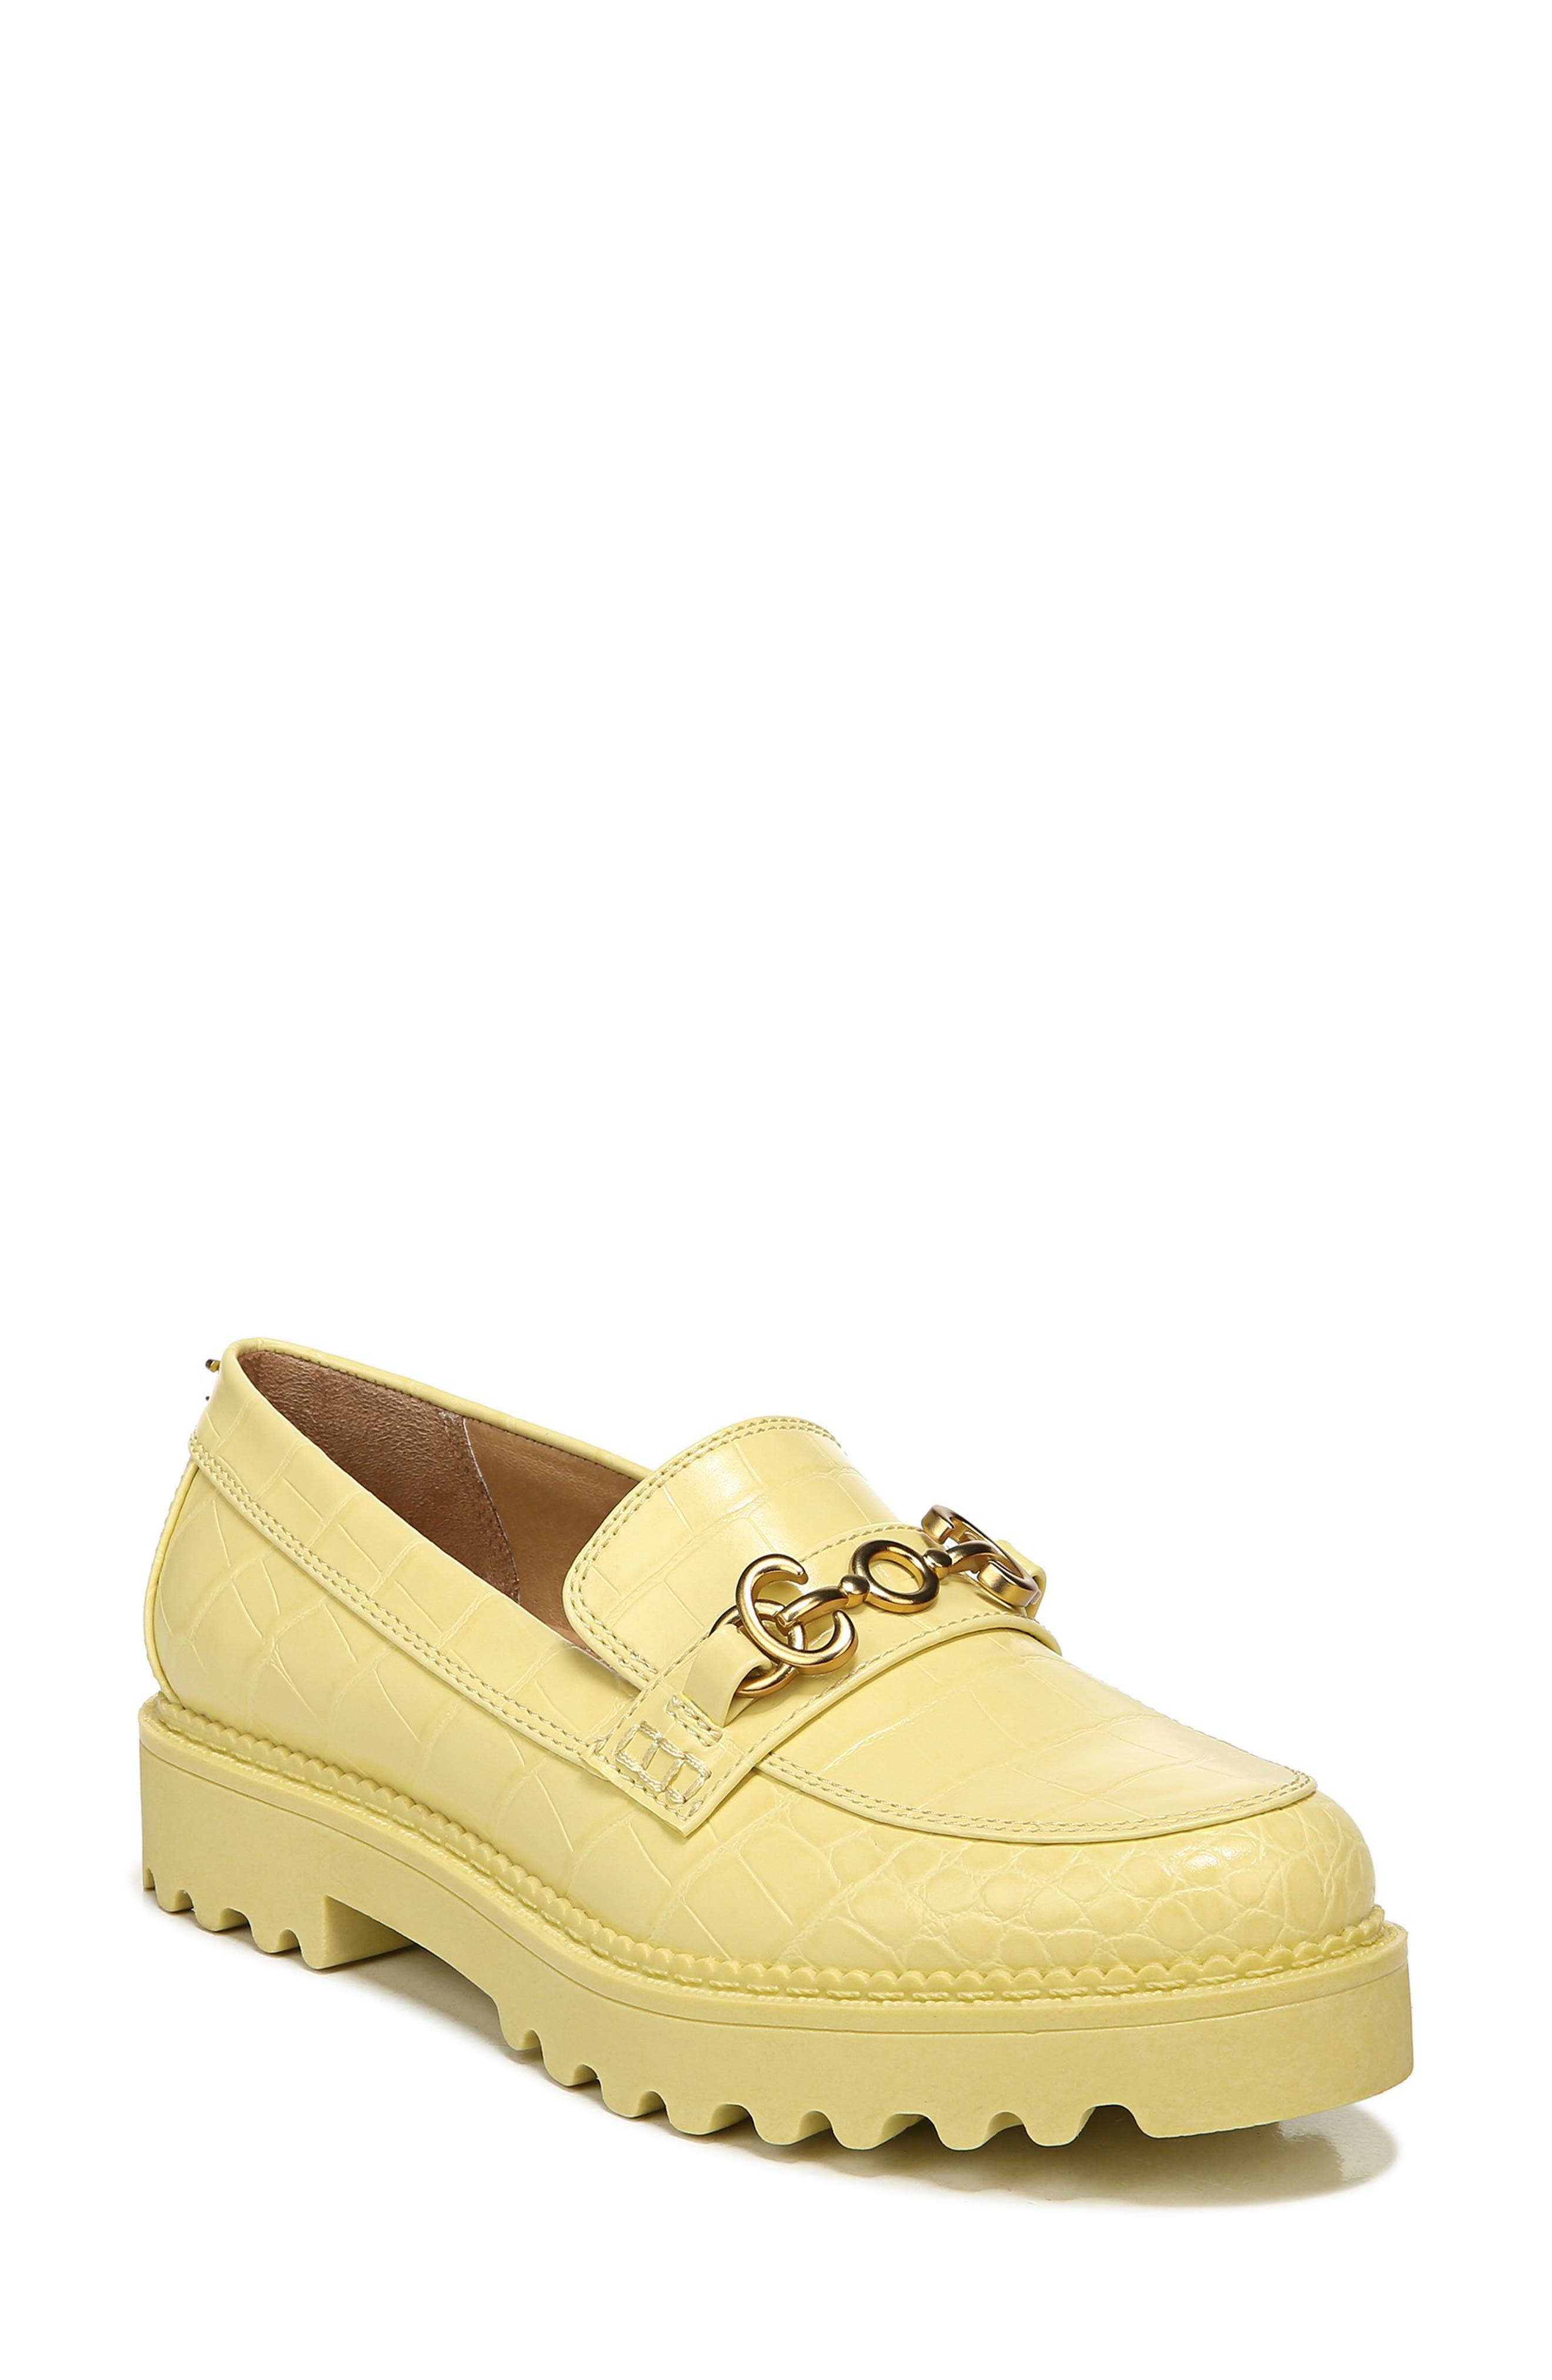 ladies yellow shoes size 6